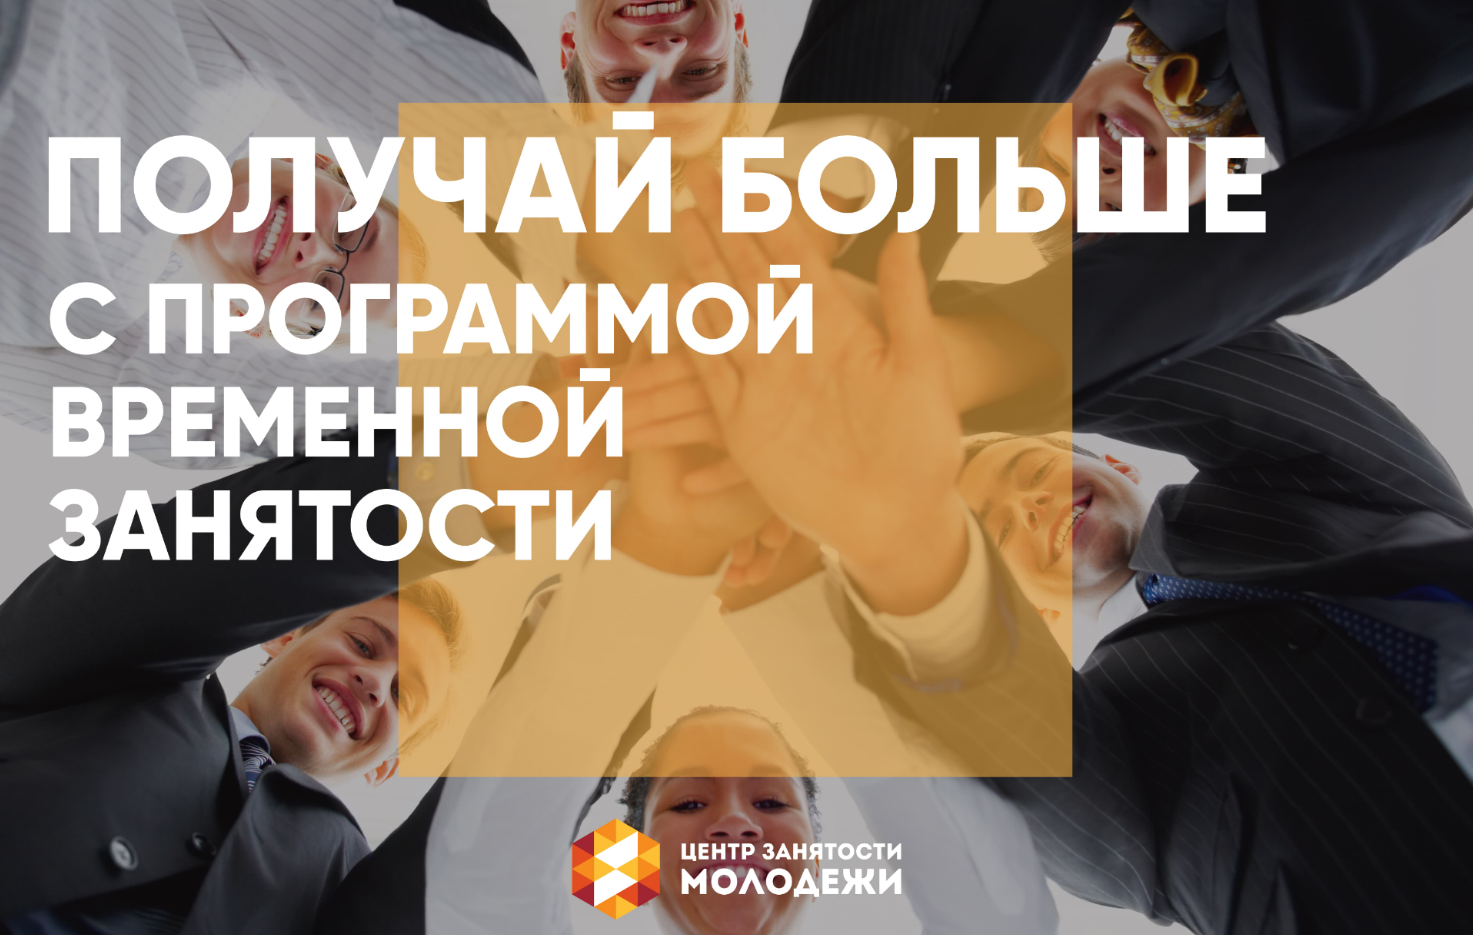 The Moscow Youth Employment Center implements temporary employment programs - Youth, Work, Career, Moscow, Money, Salary, Children, Longpost, Employment, My